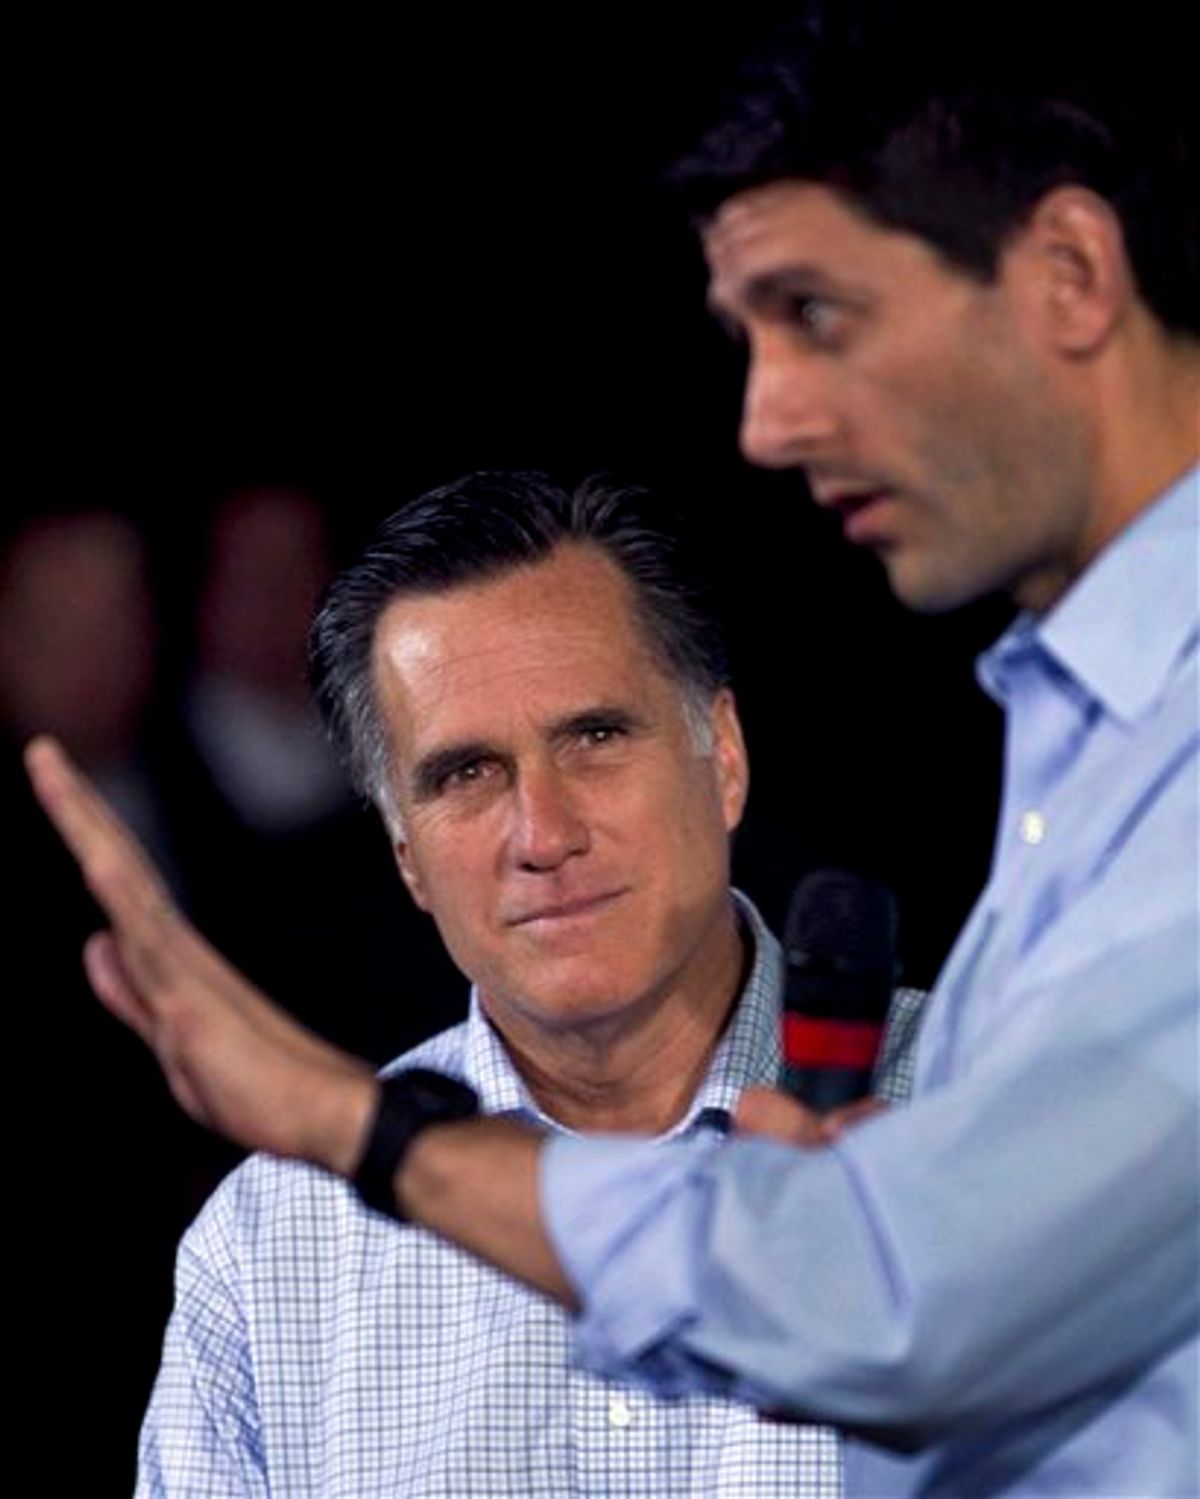 Republican presidential candidate, former Massachusetts Gov. Mitt Romney,  left, watches as U.S. Rep. Paul Ryan, R-Wis., Chairman of the House Budget Committee, right, addresses an audience during a Romney campaign event at an oil company in Milwaukee, Monday, April 2, 2012. (AP Photo/Steven Senne)               (AP)